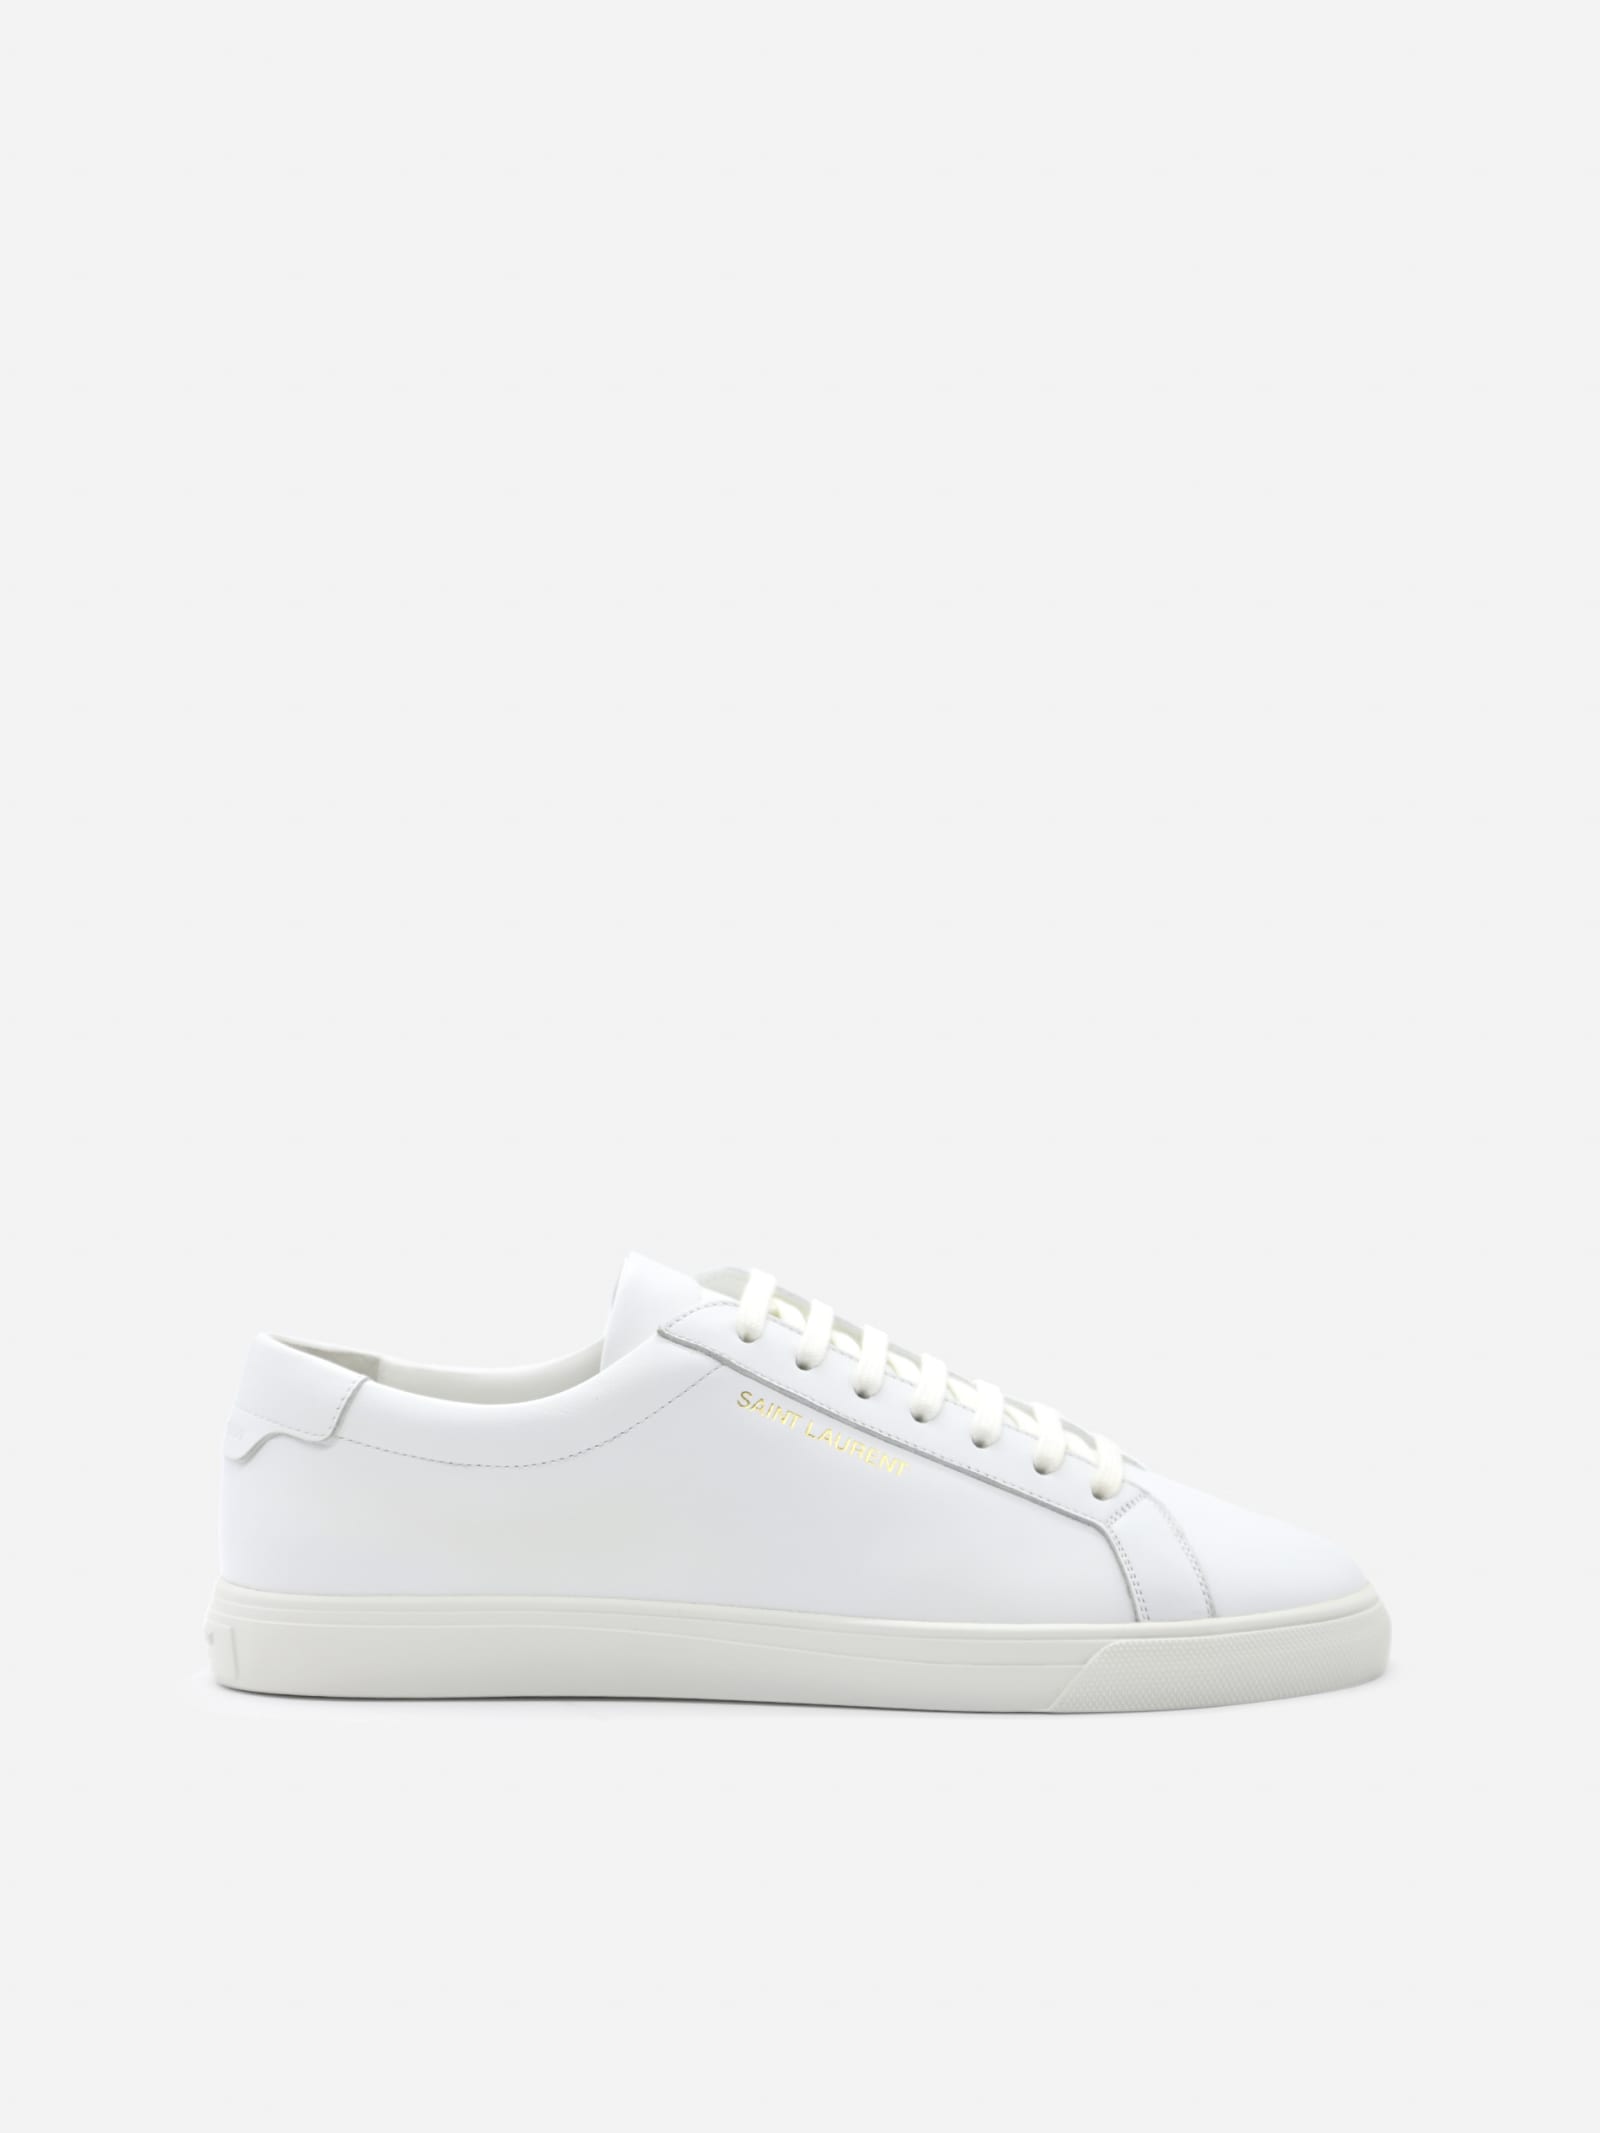 Saint Laurent Andy Sneakers In Leather